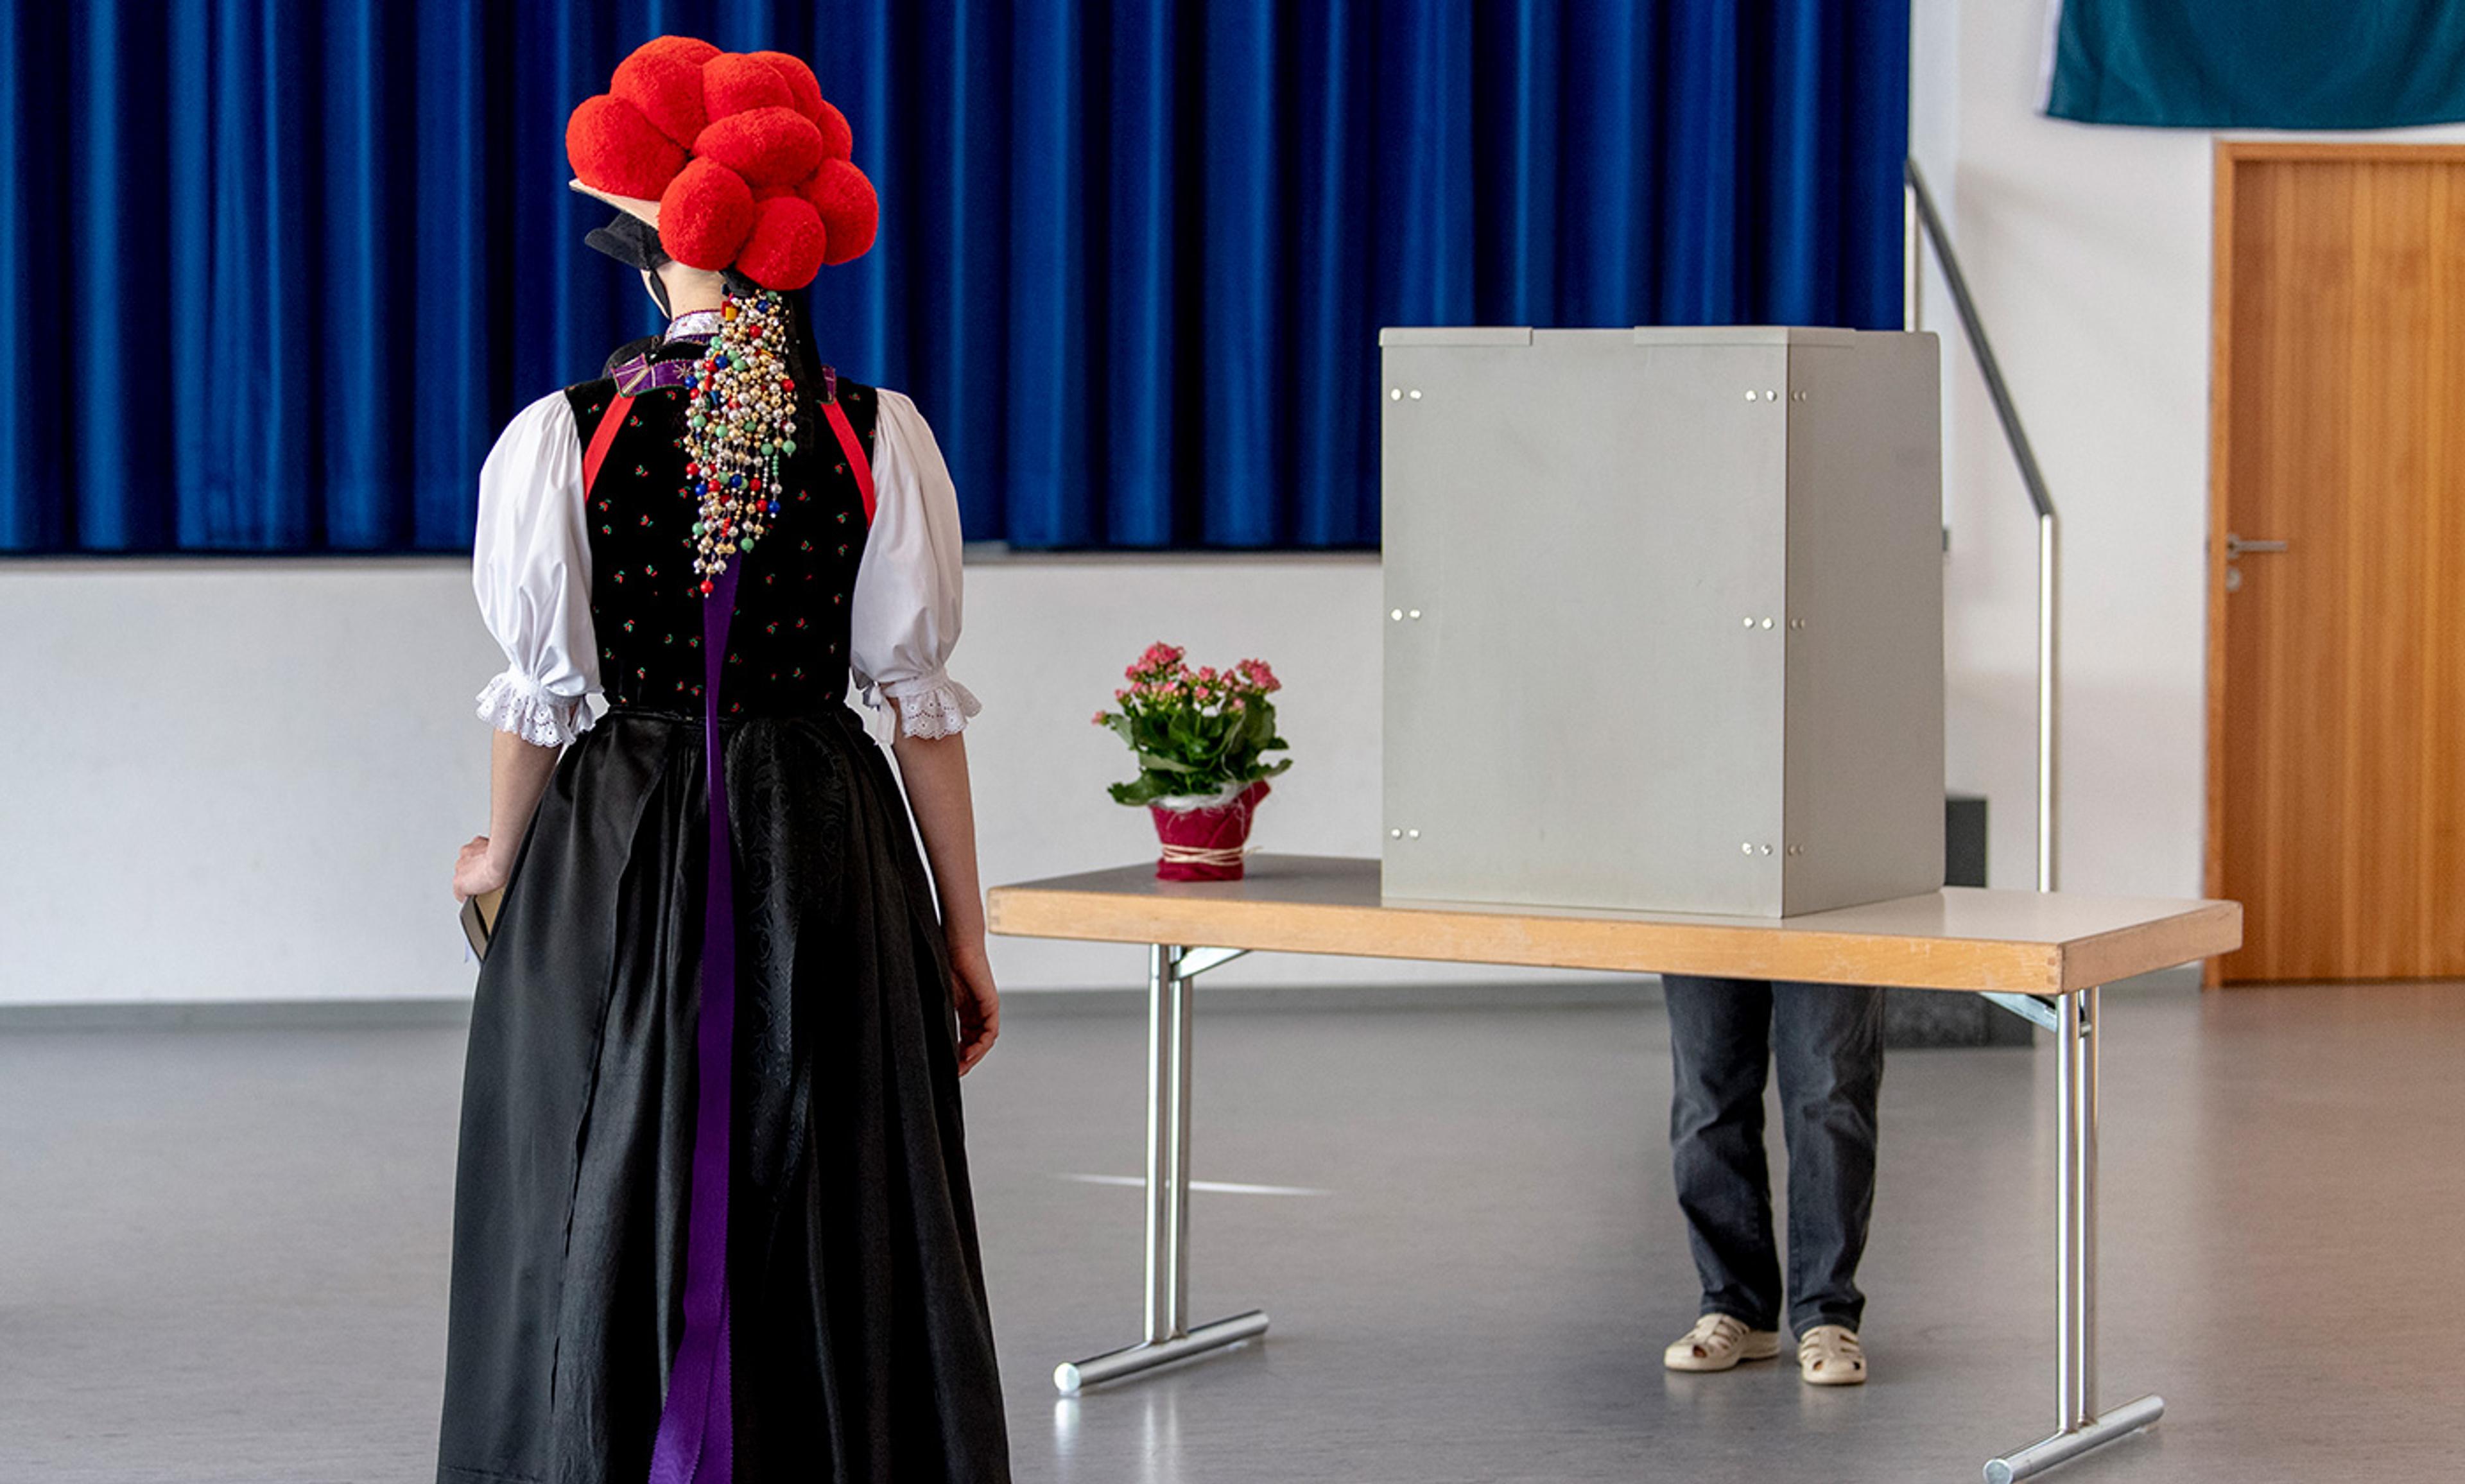 <p>A voter in traditional Black Forest costume at the polling station during the European elections. Baden-Württemberg, Germany, May 2019. <em>Photo by Patrick Seeger/Dpa/Getty</em></p>